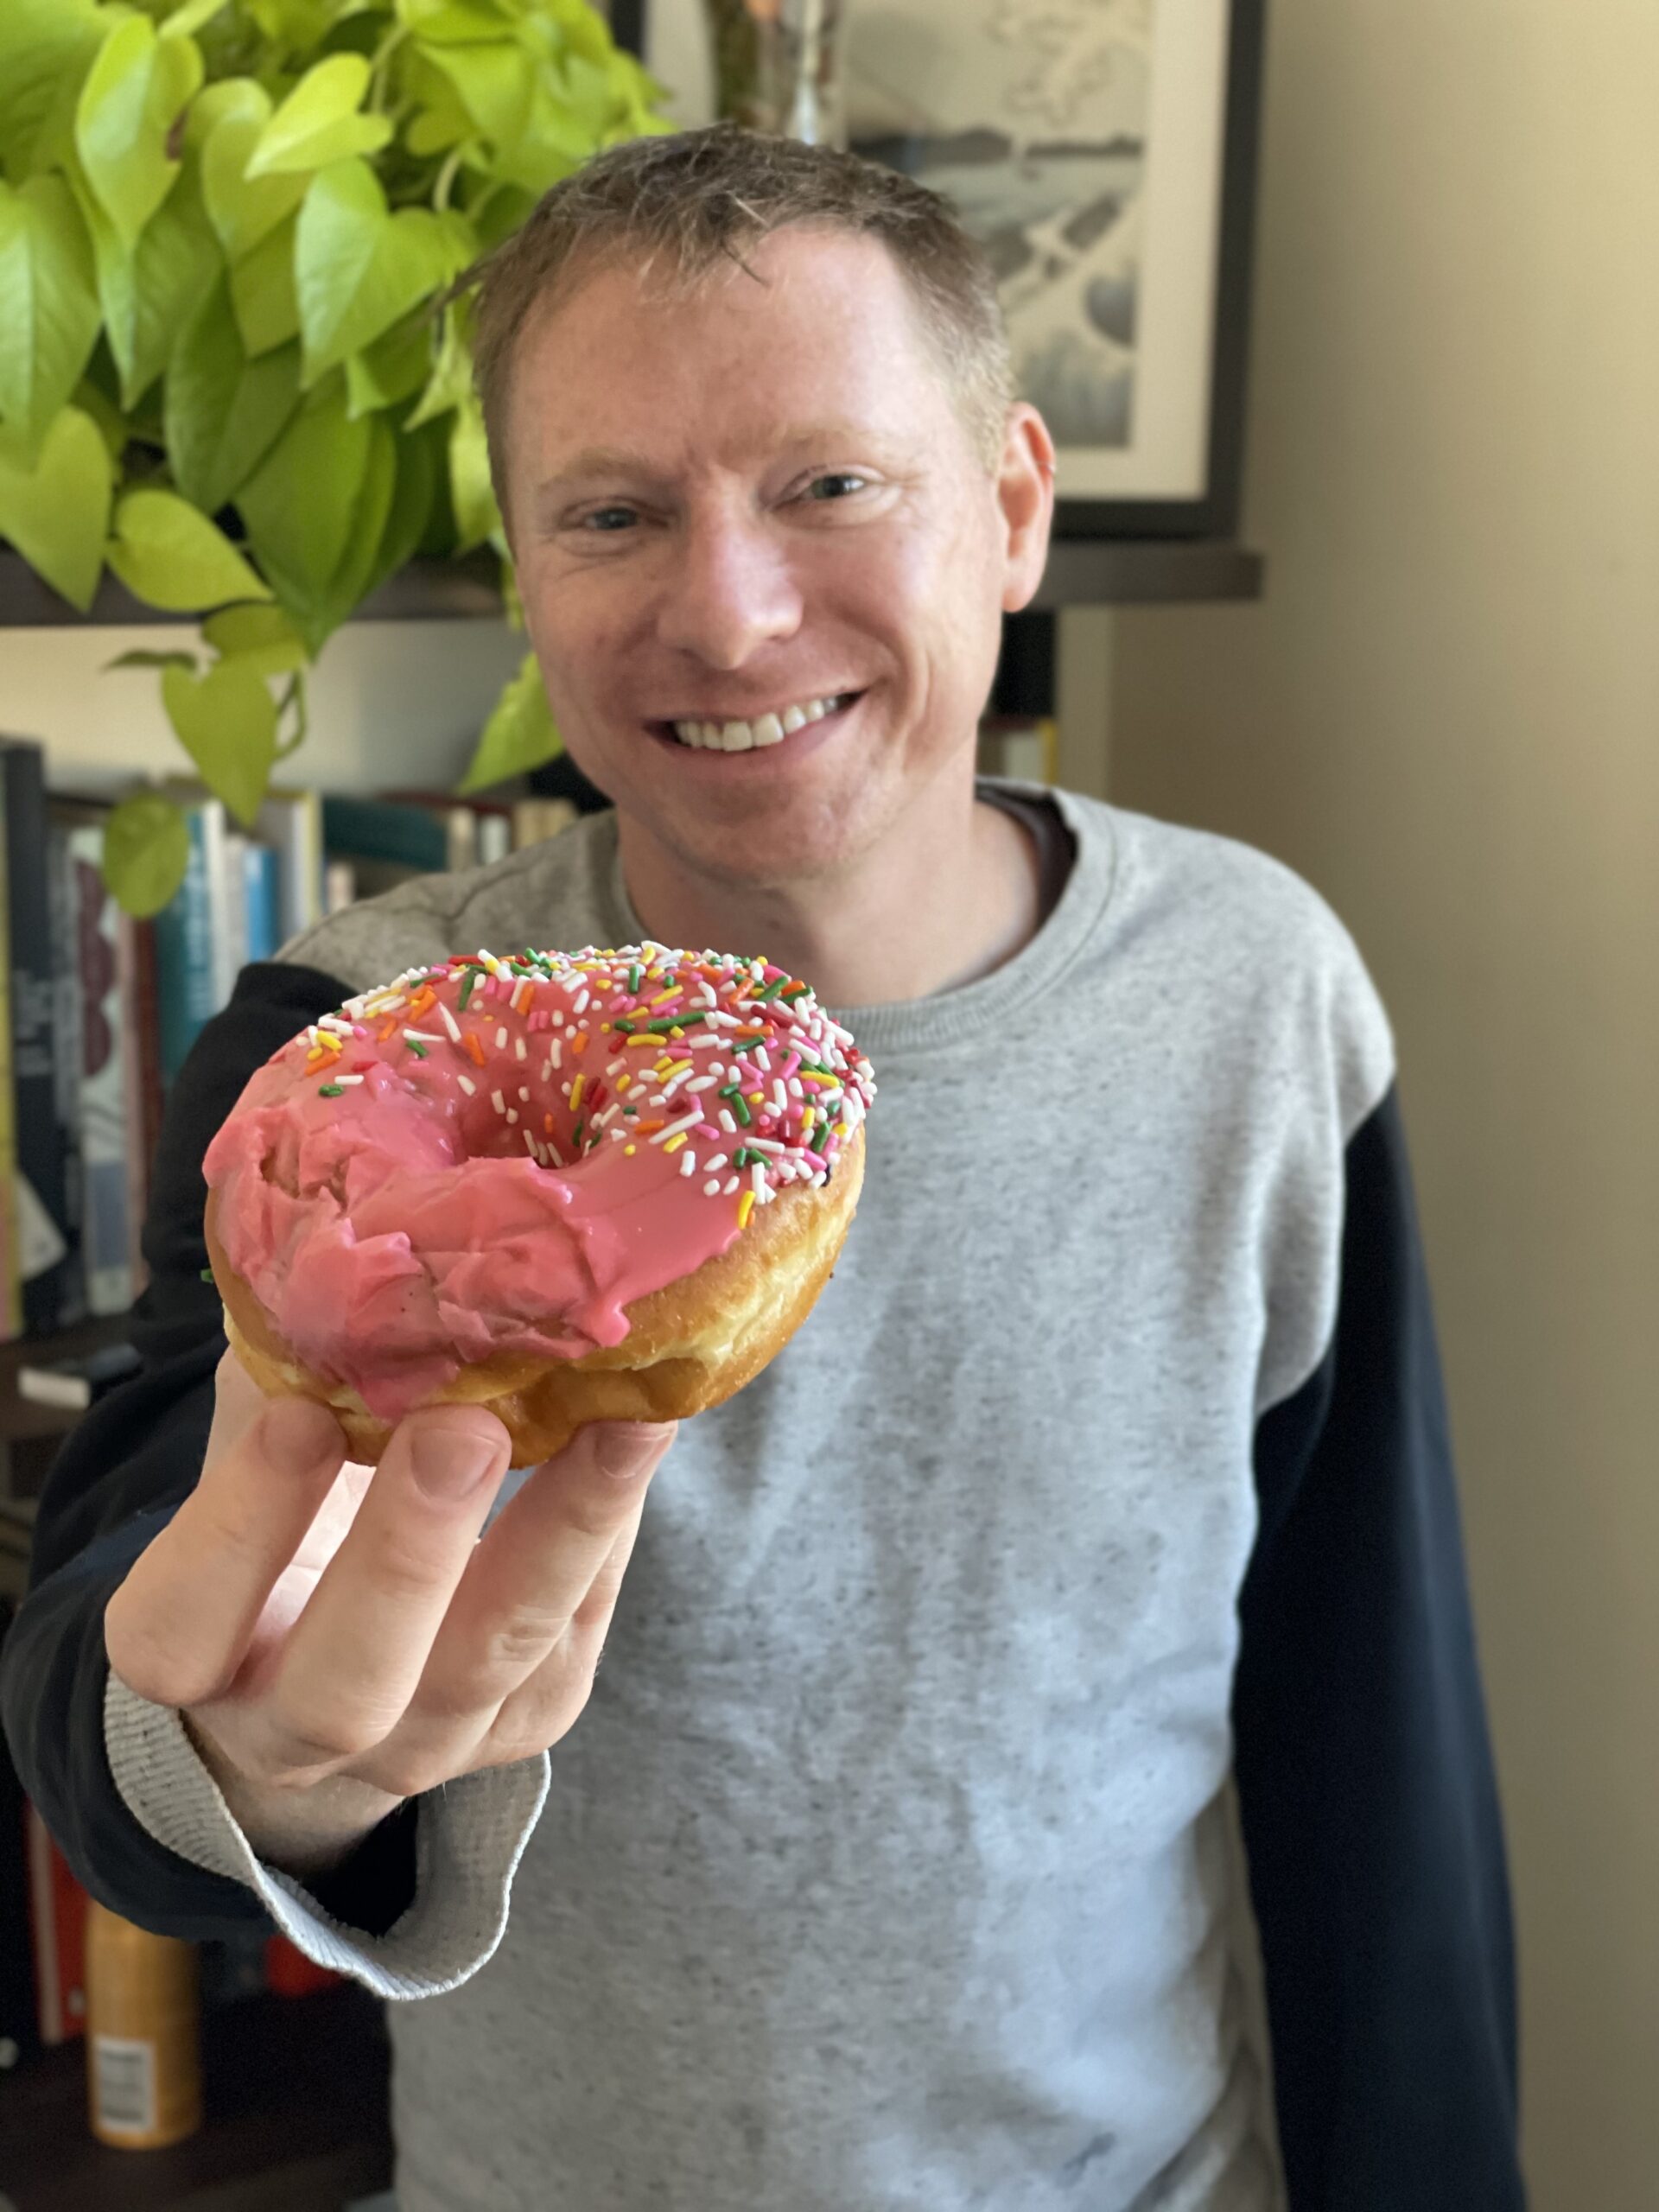 photo of smiling man in gray sweater holding a pink sprinkle donut in the foreground